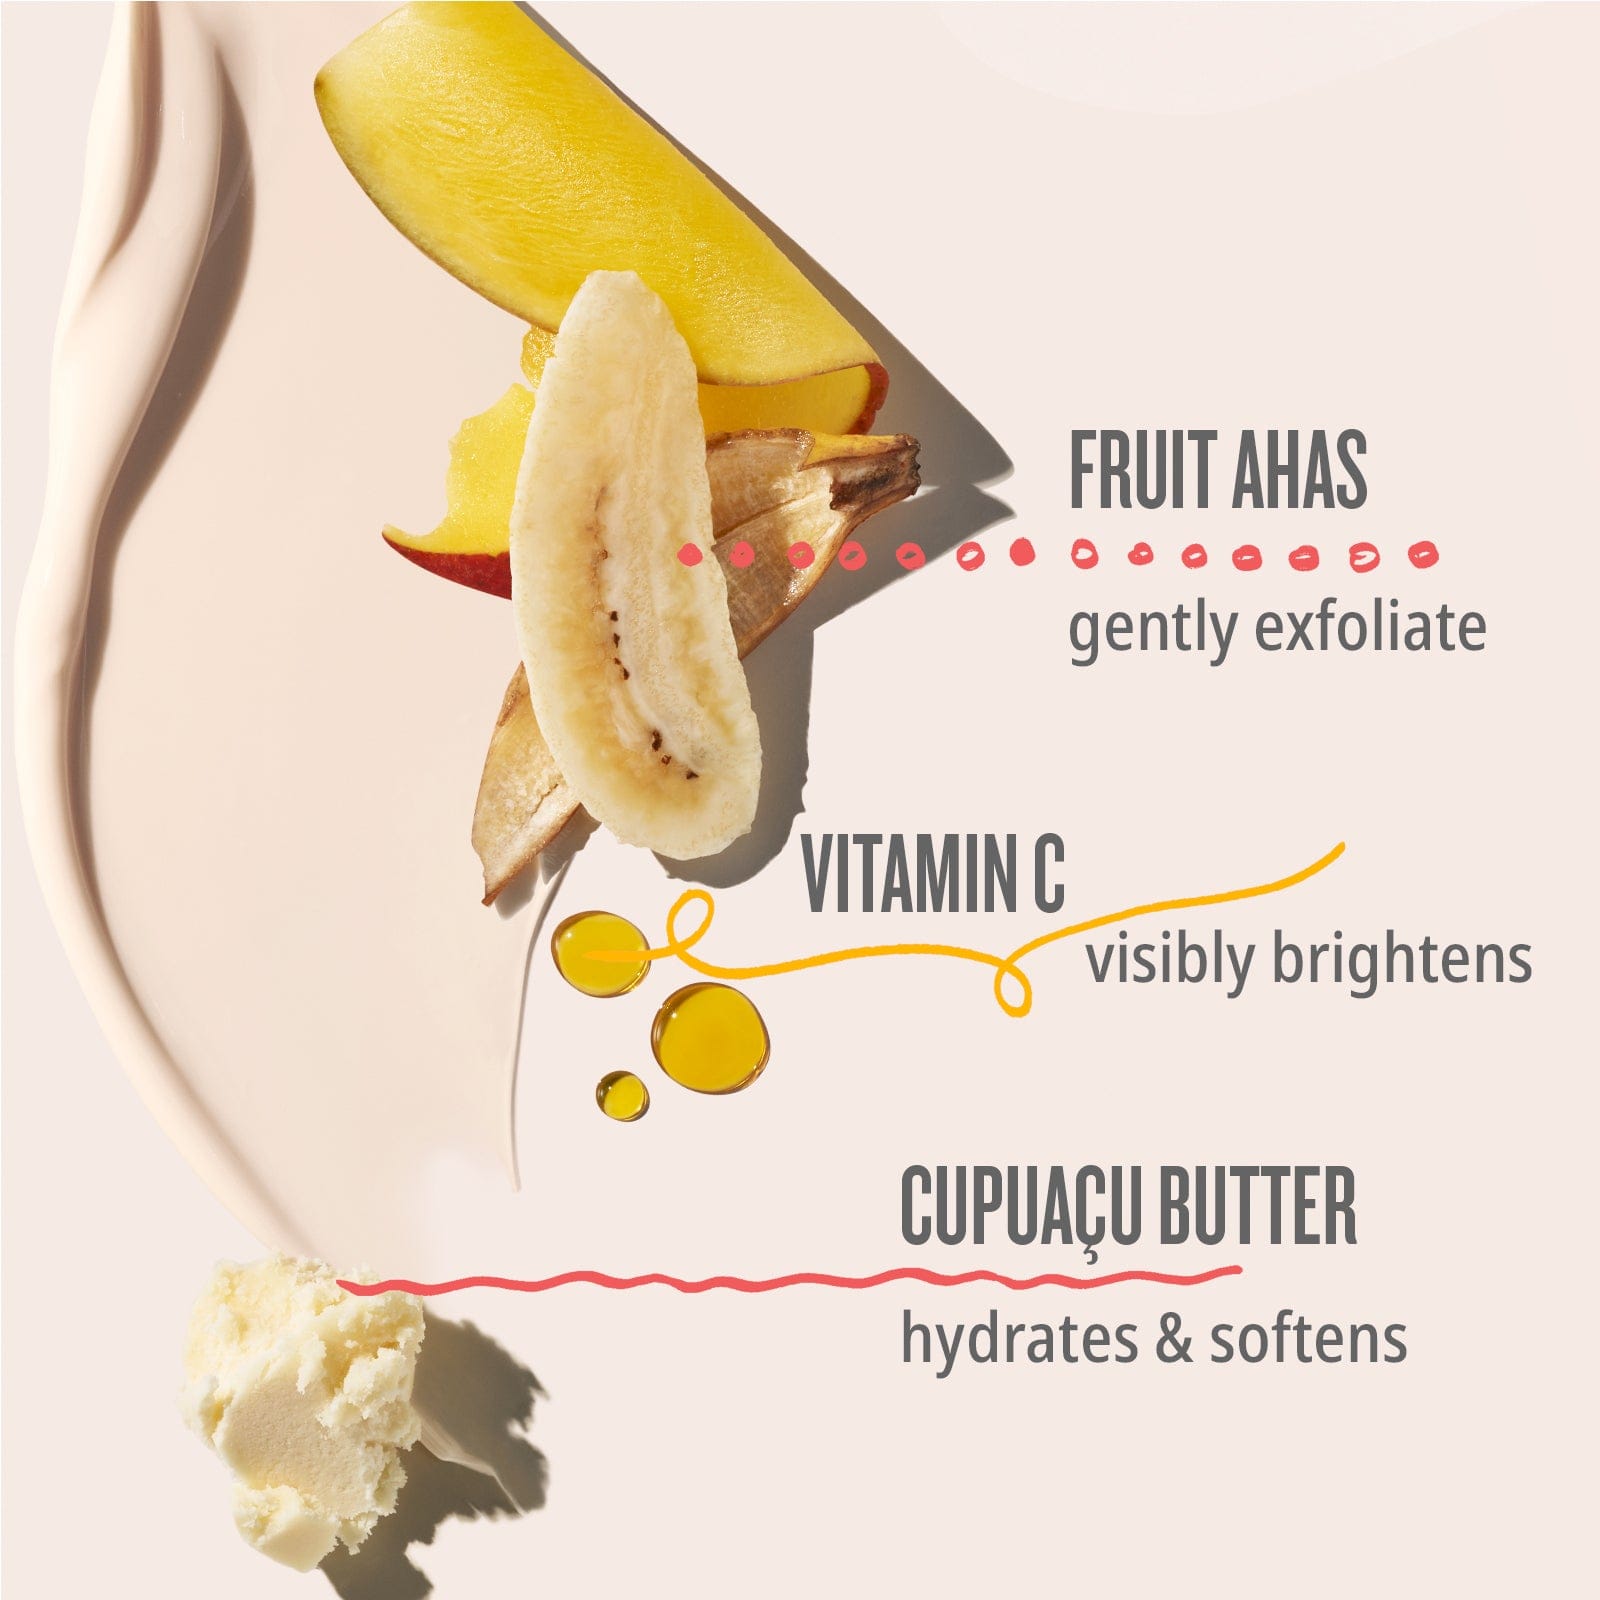 Fruit AHAs gently exfoliate, Vitamin C visibly brightens, Cupuacu Butter hydrates &amp; softens